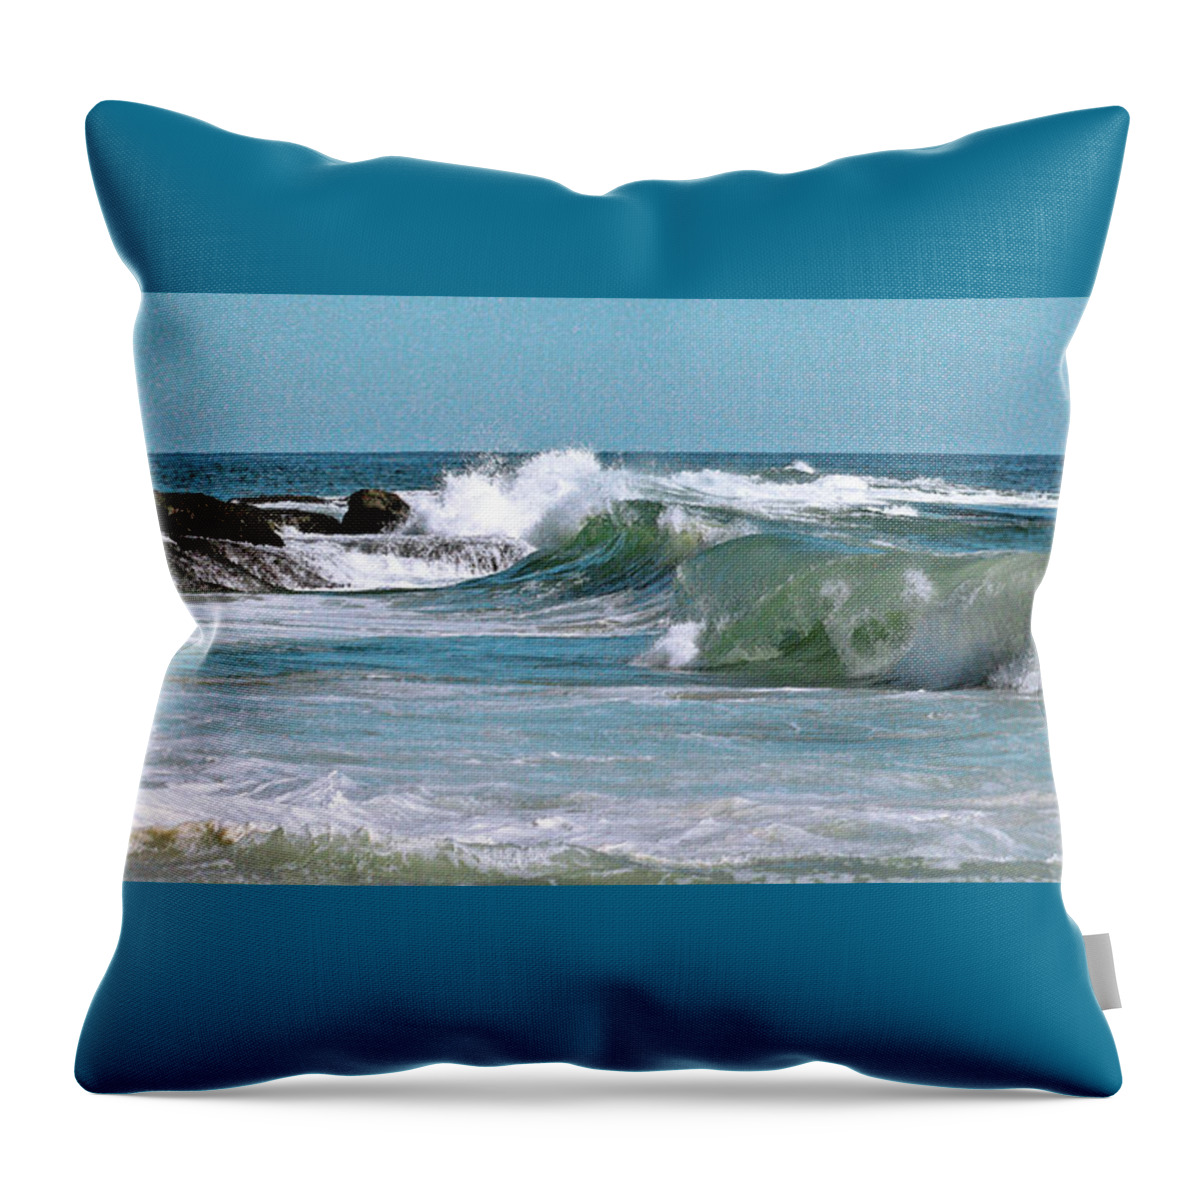 Seascape Throw Pillow featuring the photograph Stormy Lagune - Blue Seascape by Ben and Raisa Gertsberg